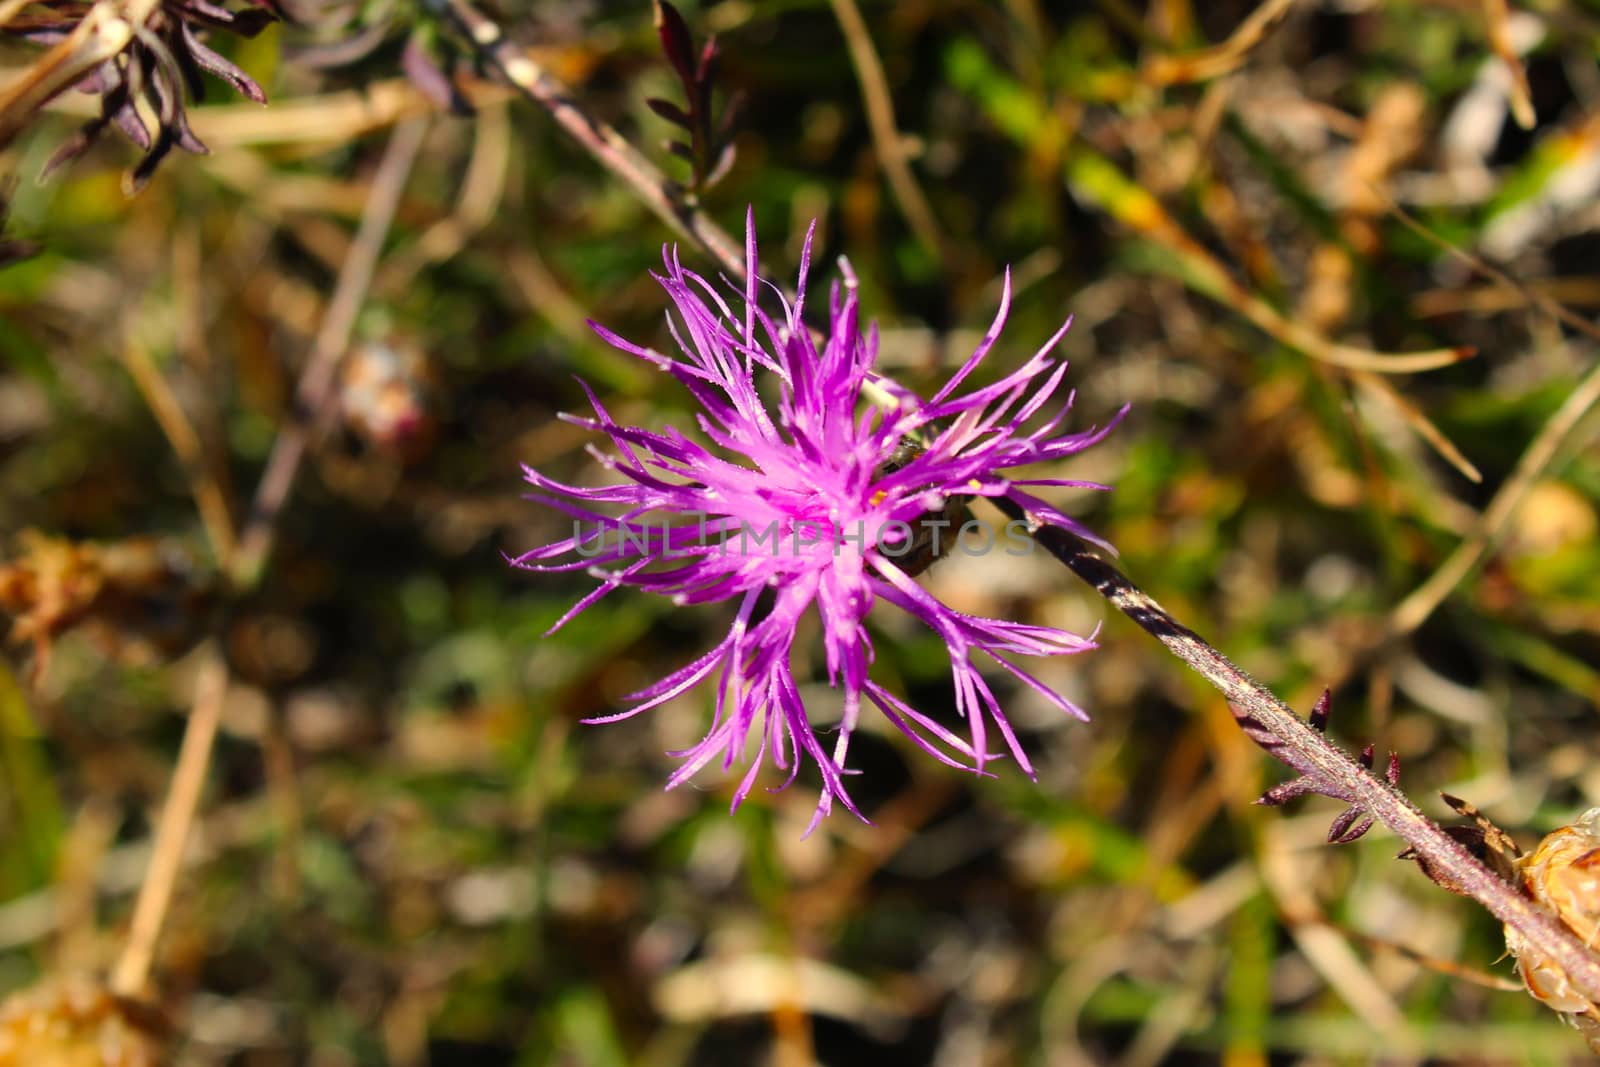 Centaurea jacea (brown knapweed or brownray knapweed) is a species of herbaceous perennial plants in the genus Centaurea native to dry meadows and open woodland. by mahirrov